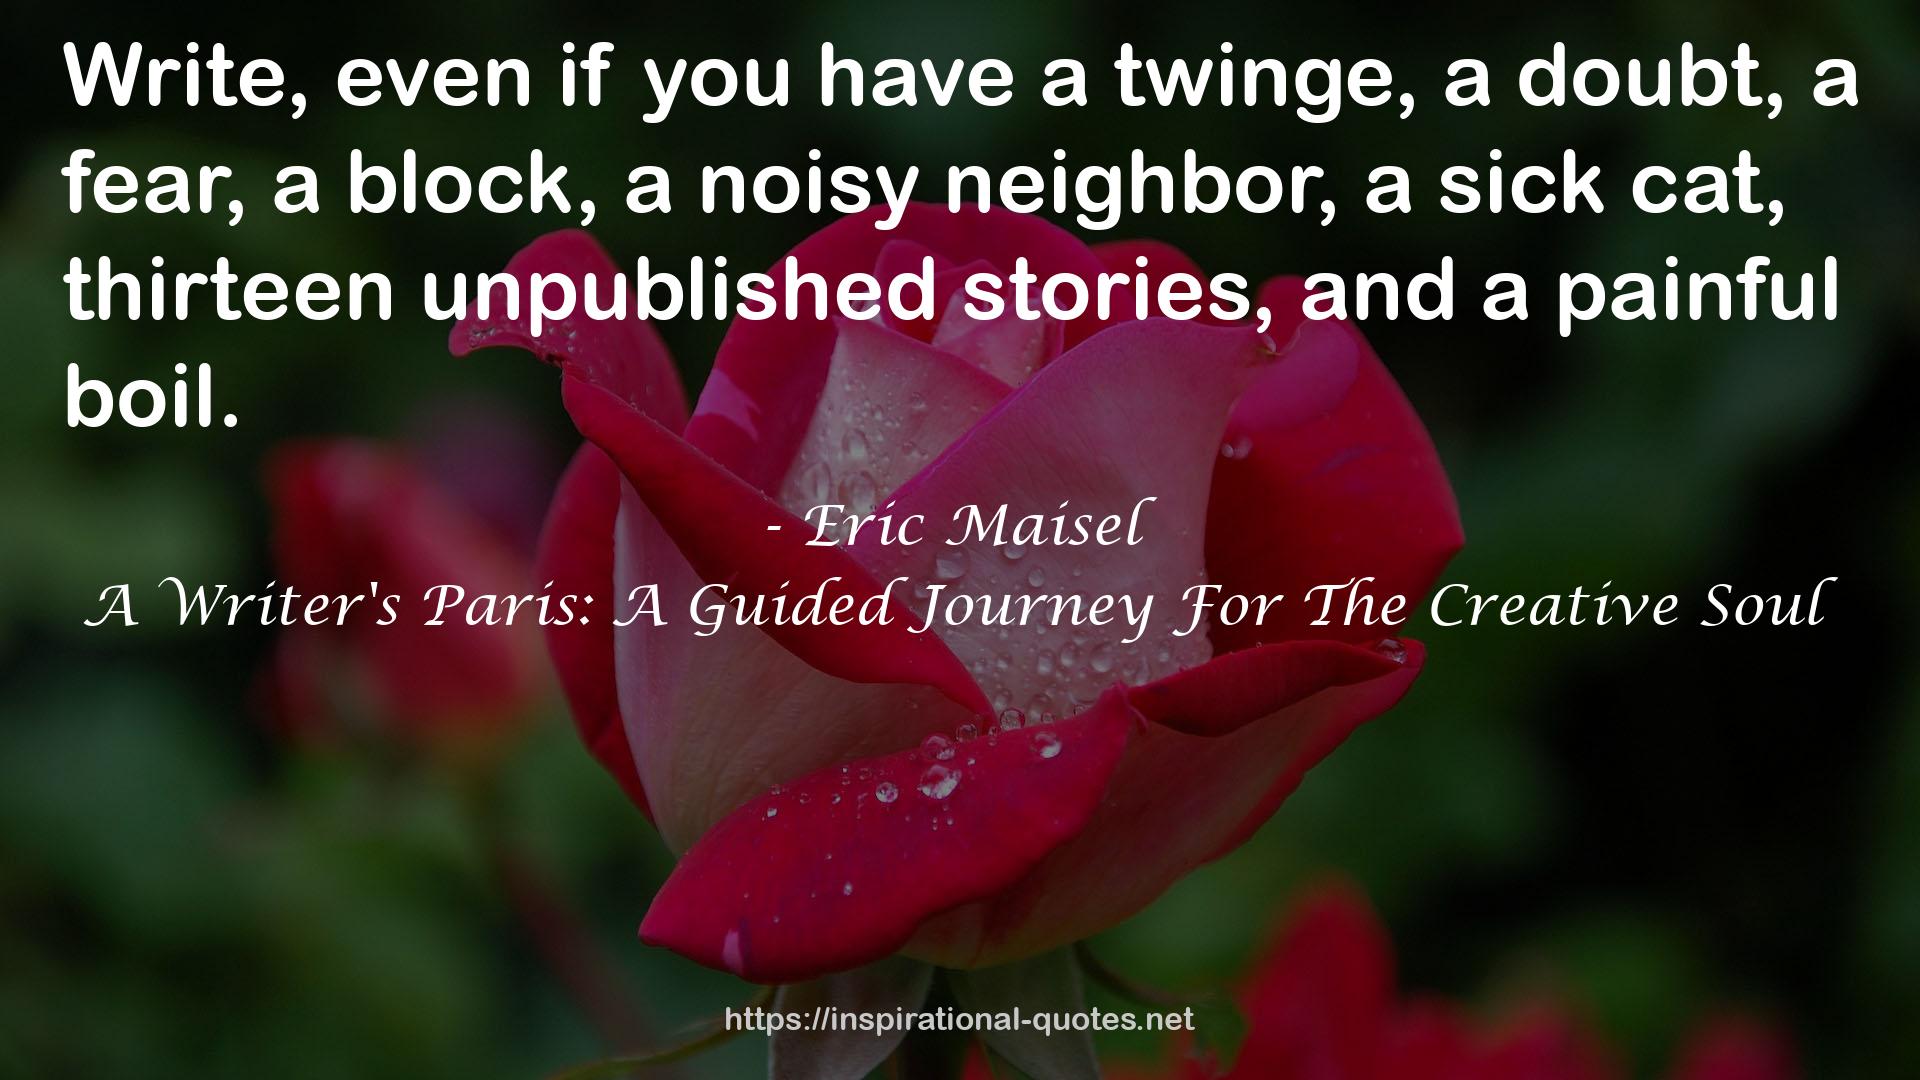 A Writer's Paris: A Guided Journey For The Creative Soul QUOTES